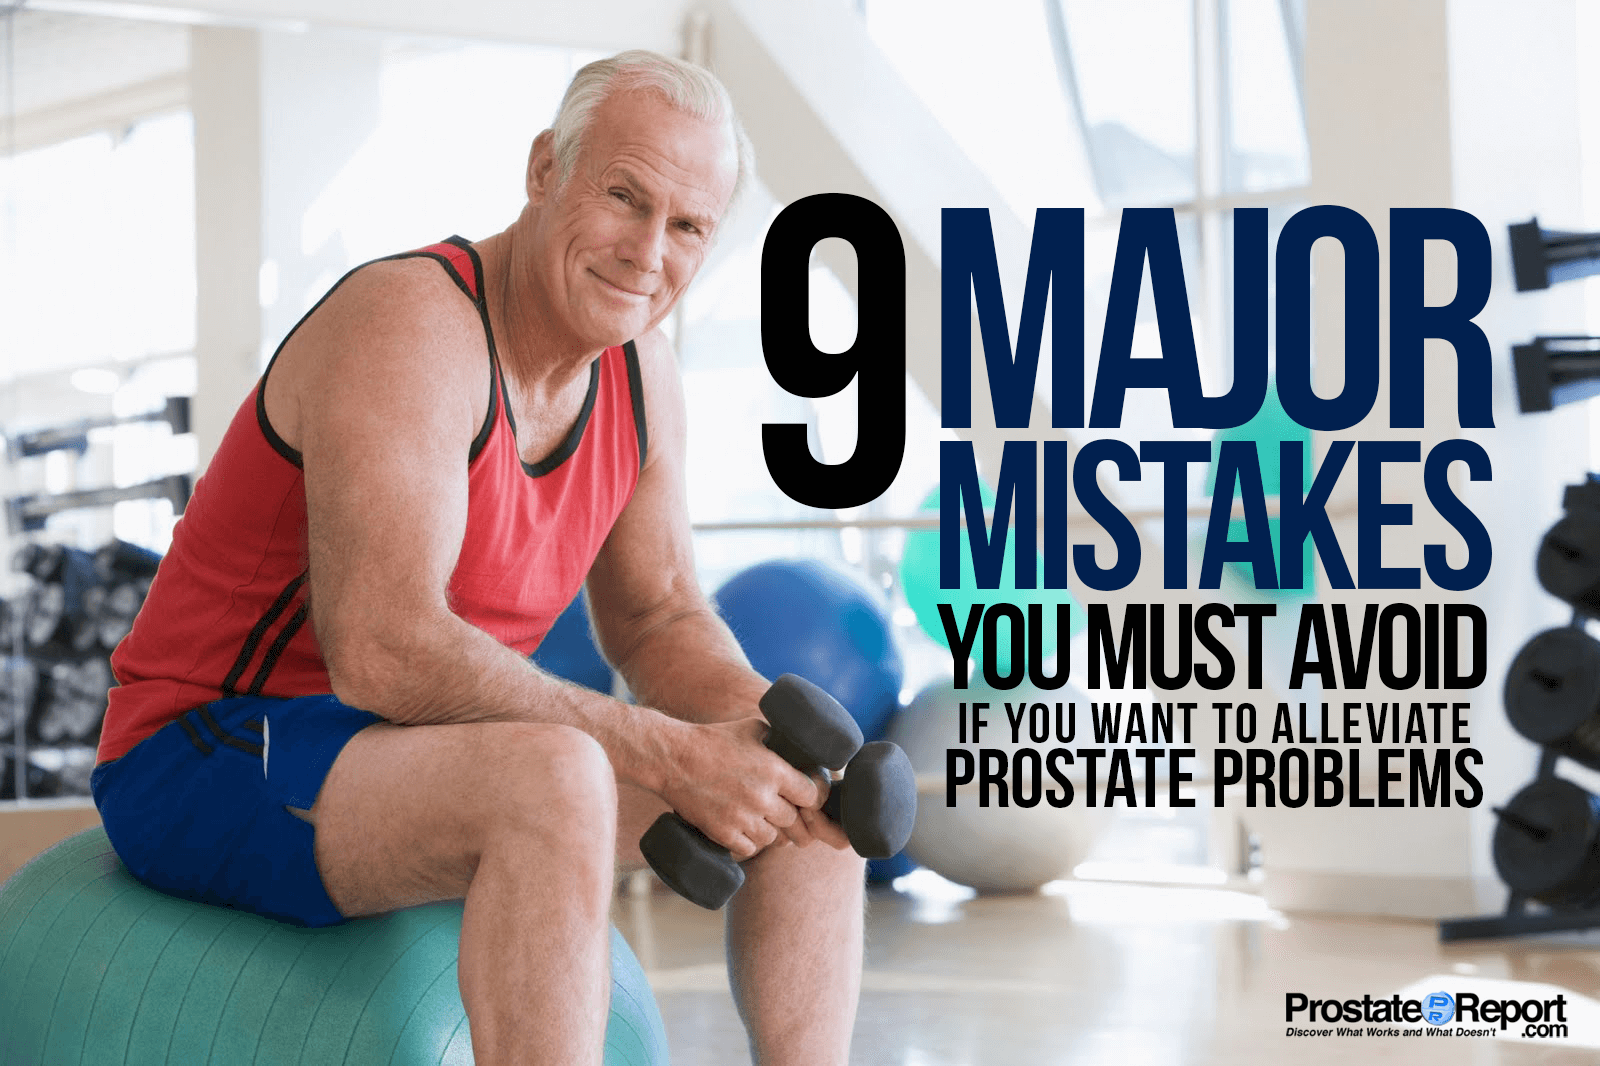 How to avoid the 9 major mistakes of prosat